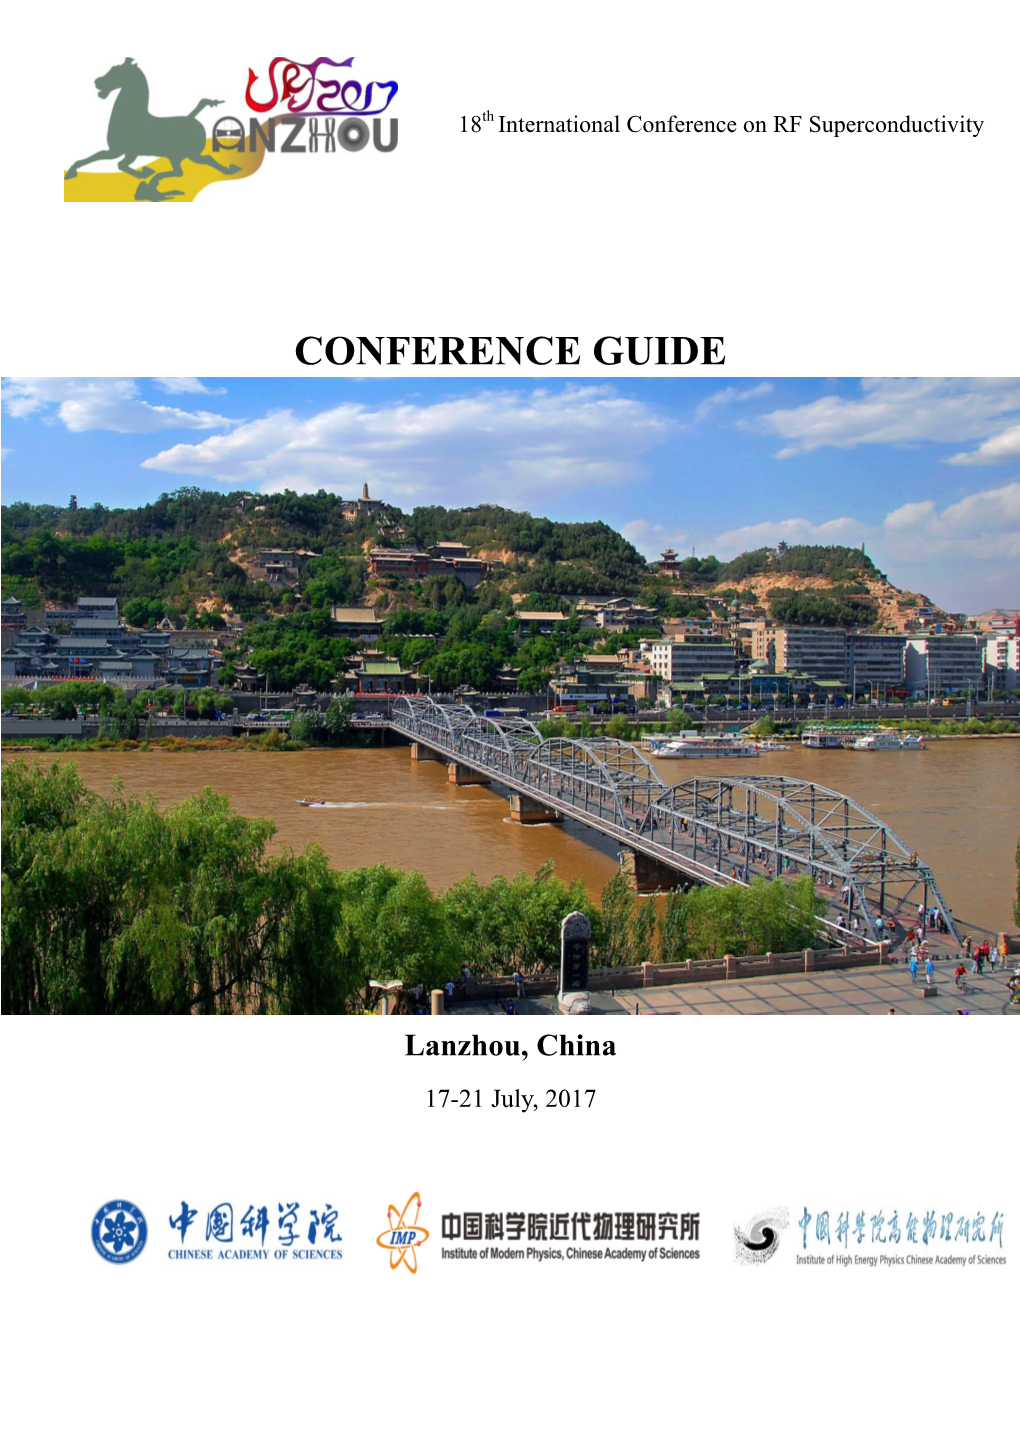 SRF2017 Conference Guide